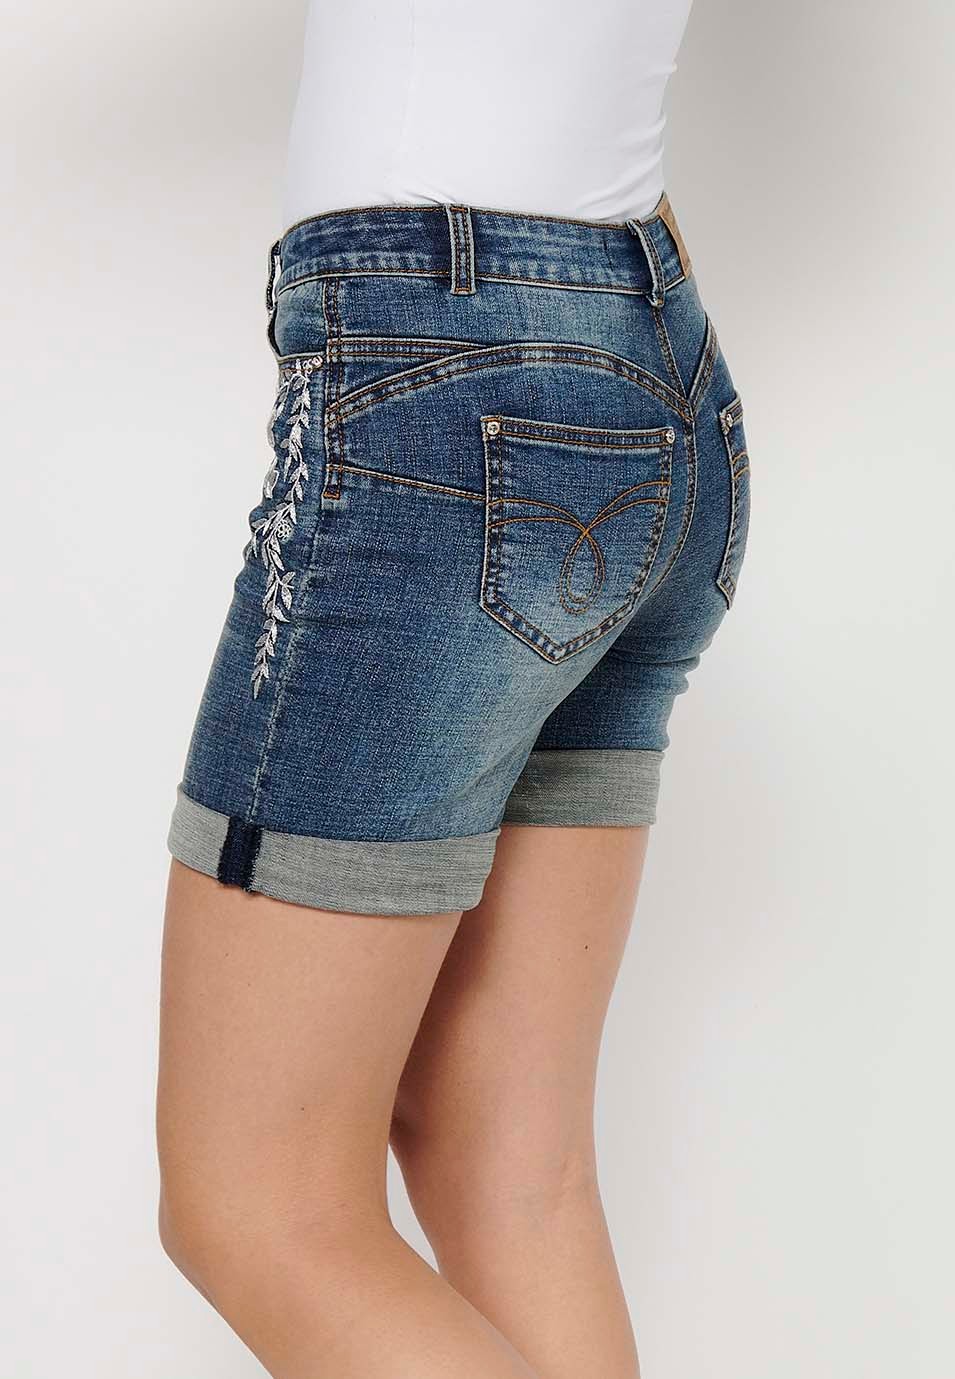 Short shorts with a turn-up finish with front zipper and button closure and blue floral embroidery for Women 6